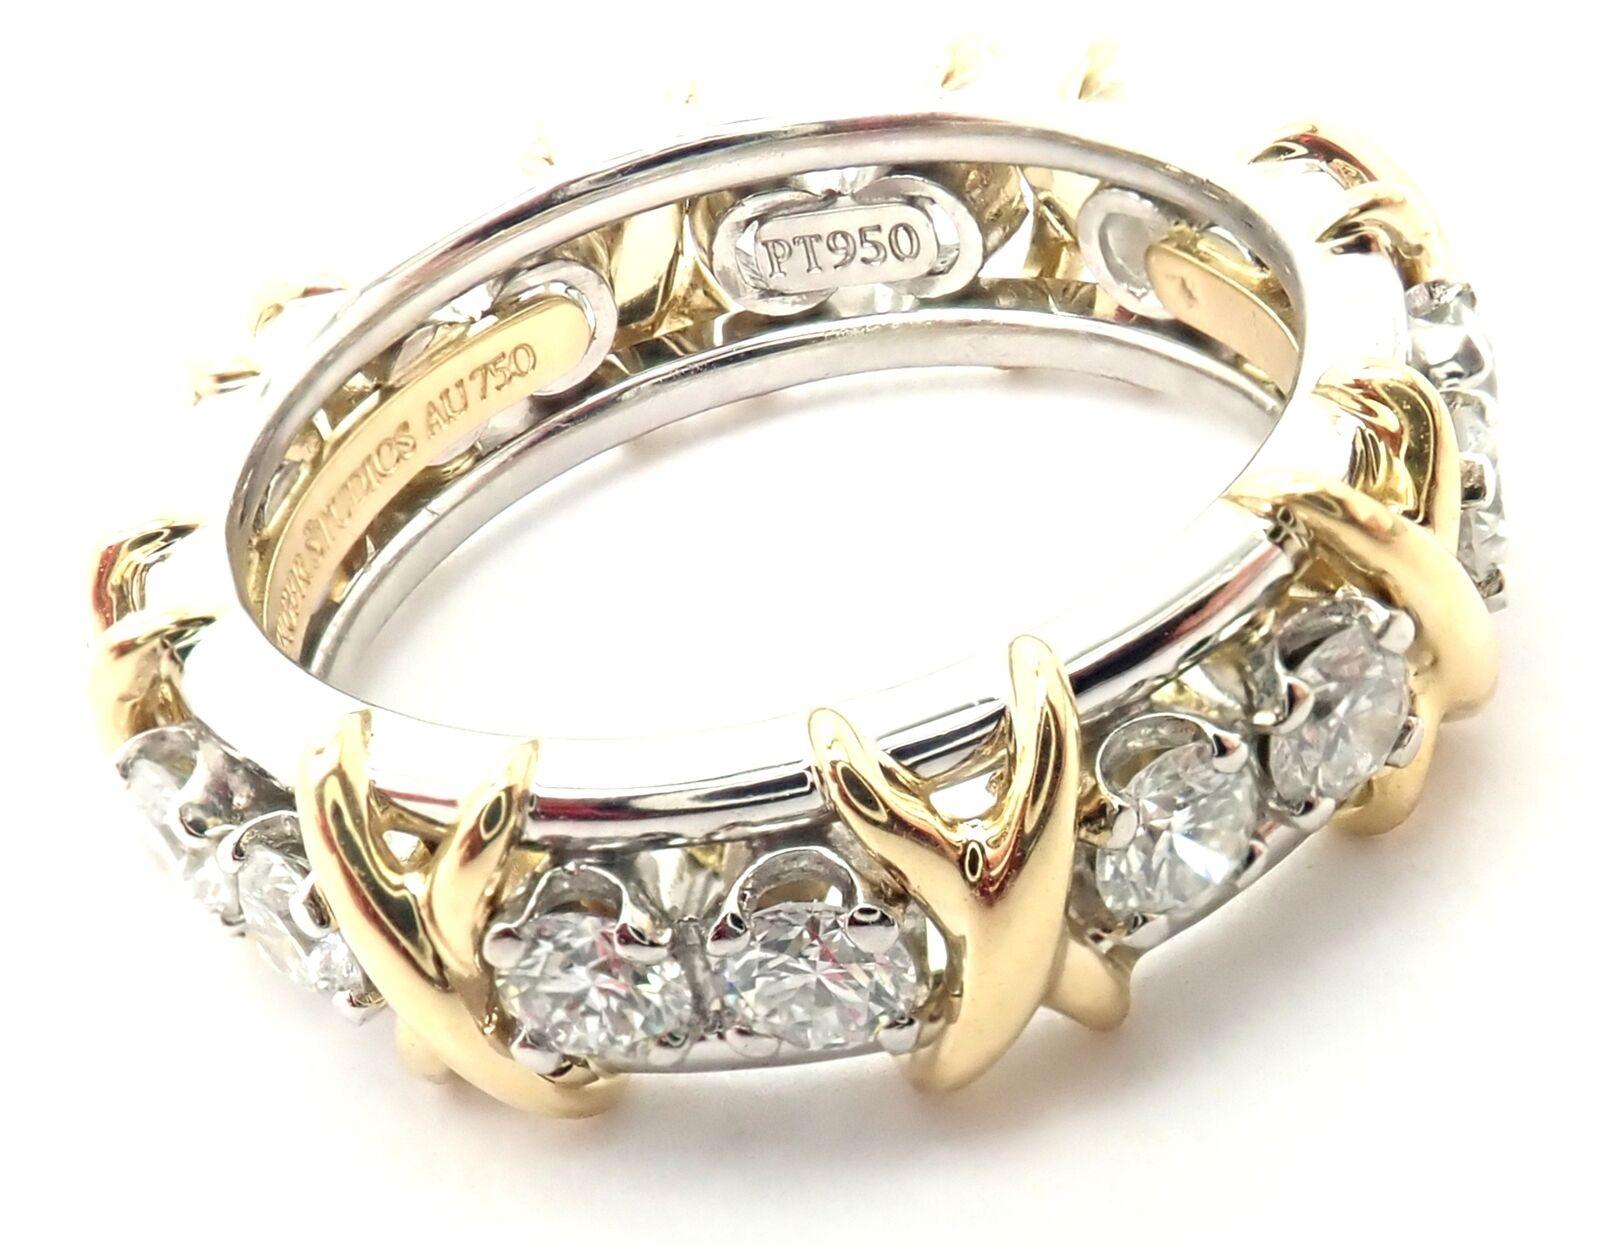 18k Yellow Gold & Platinum Diamond Jean Schlumberger Band Ring designed for Tiffany & Co. 
With 16 Round Brilliant Cut Diamonds VS1 clarity, G color, Total weight Approx 1.14ct
This ring comes with Tiffany Box and a receipt from the